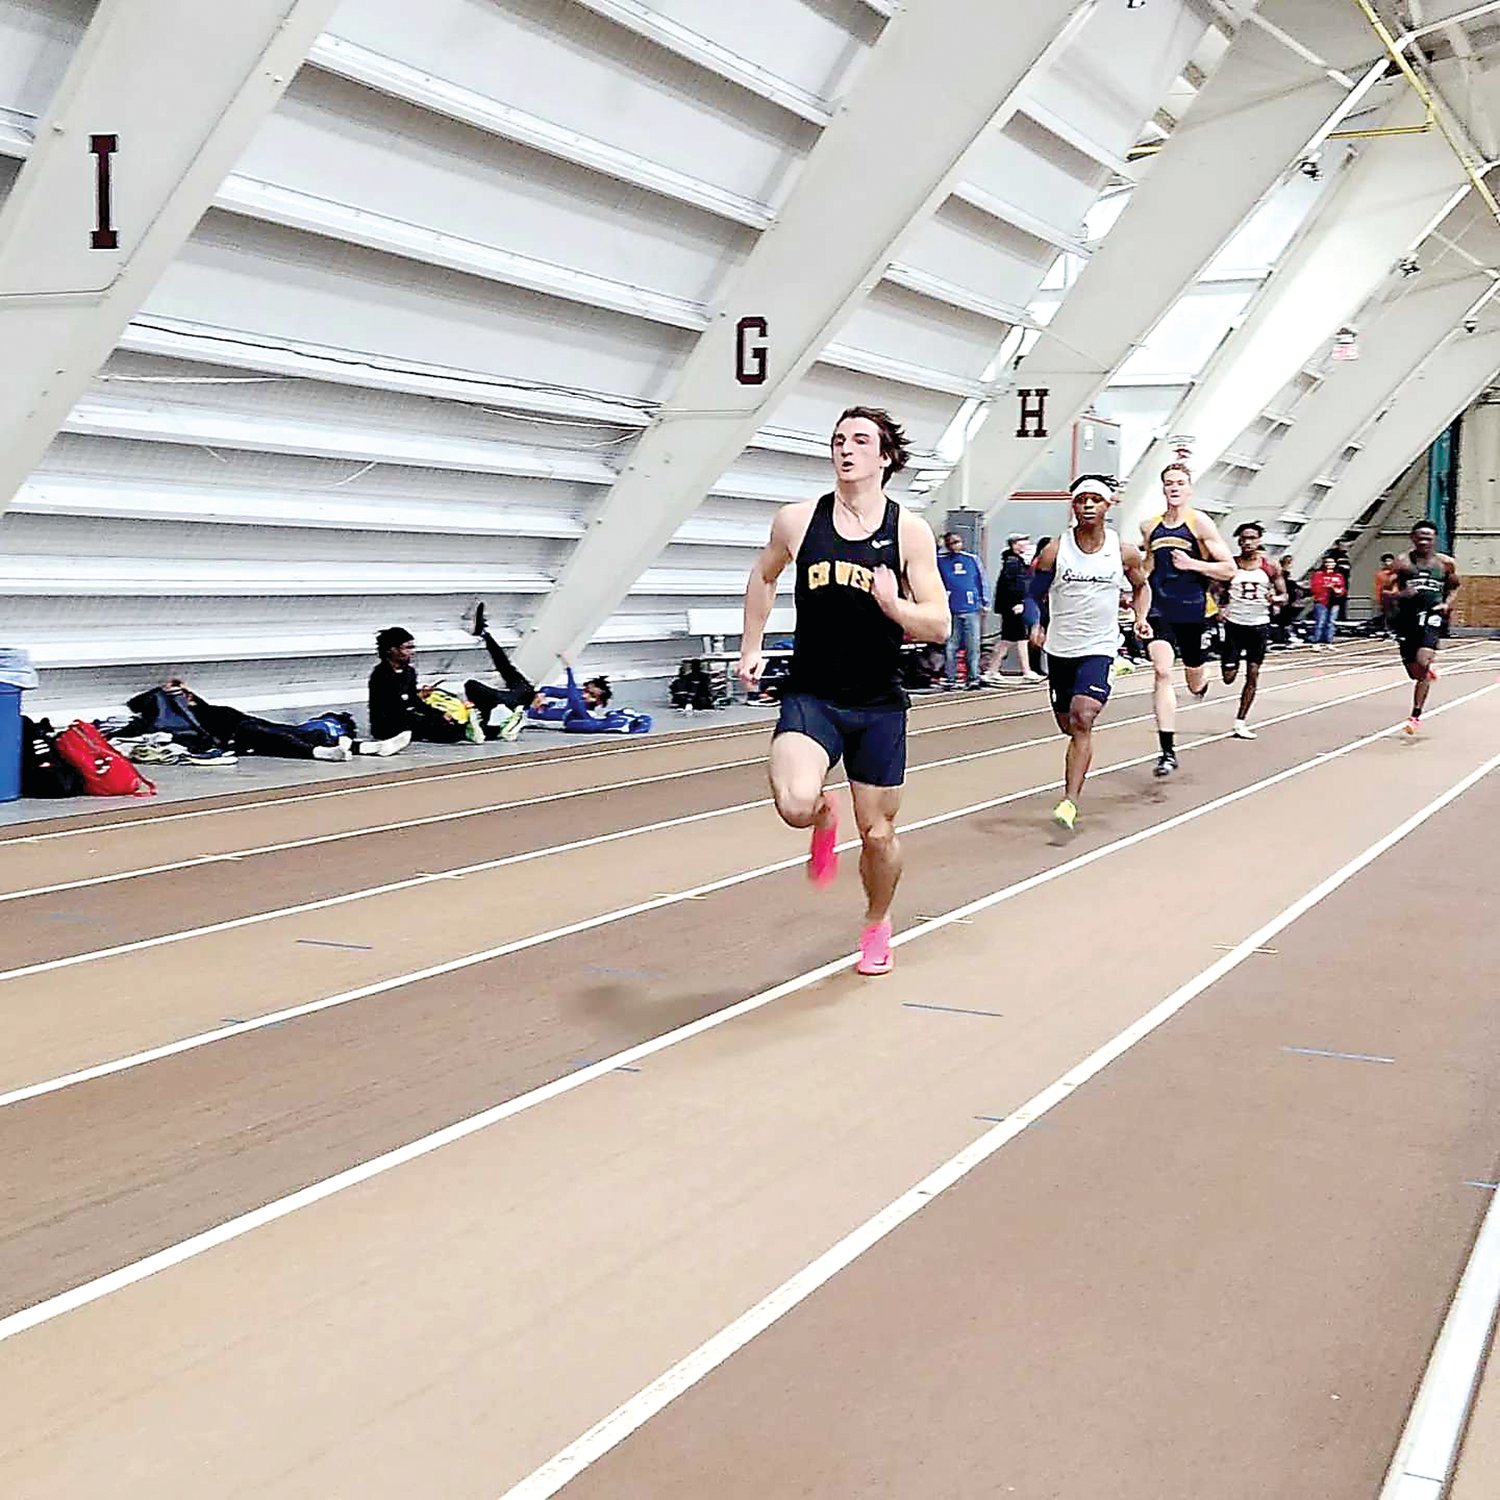 CB West’s Conor McFadden, the state champion, ran the second fastest underclassmen 200M indoor time at the March 10-11 New Balance Indoor championships in Boston. The CB West 4x200 team set a school record.